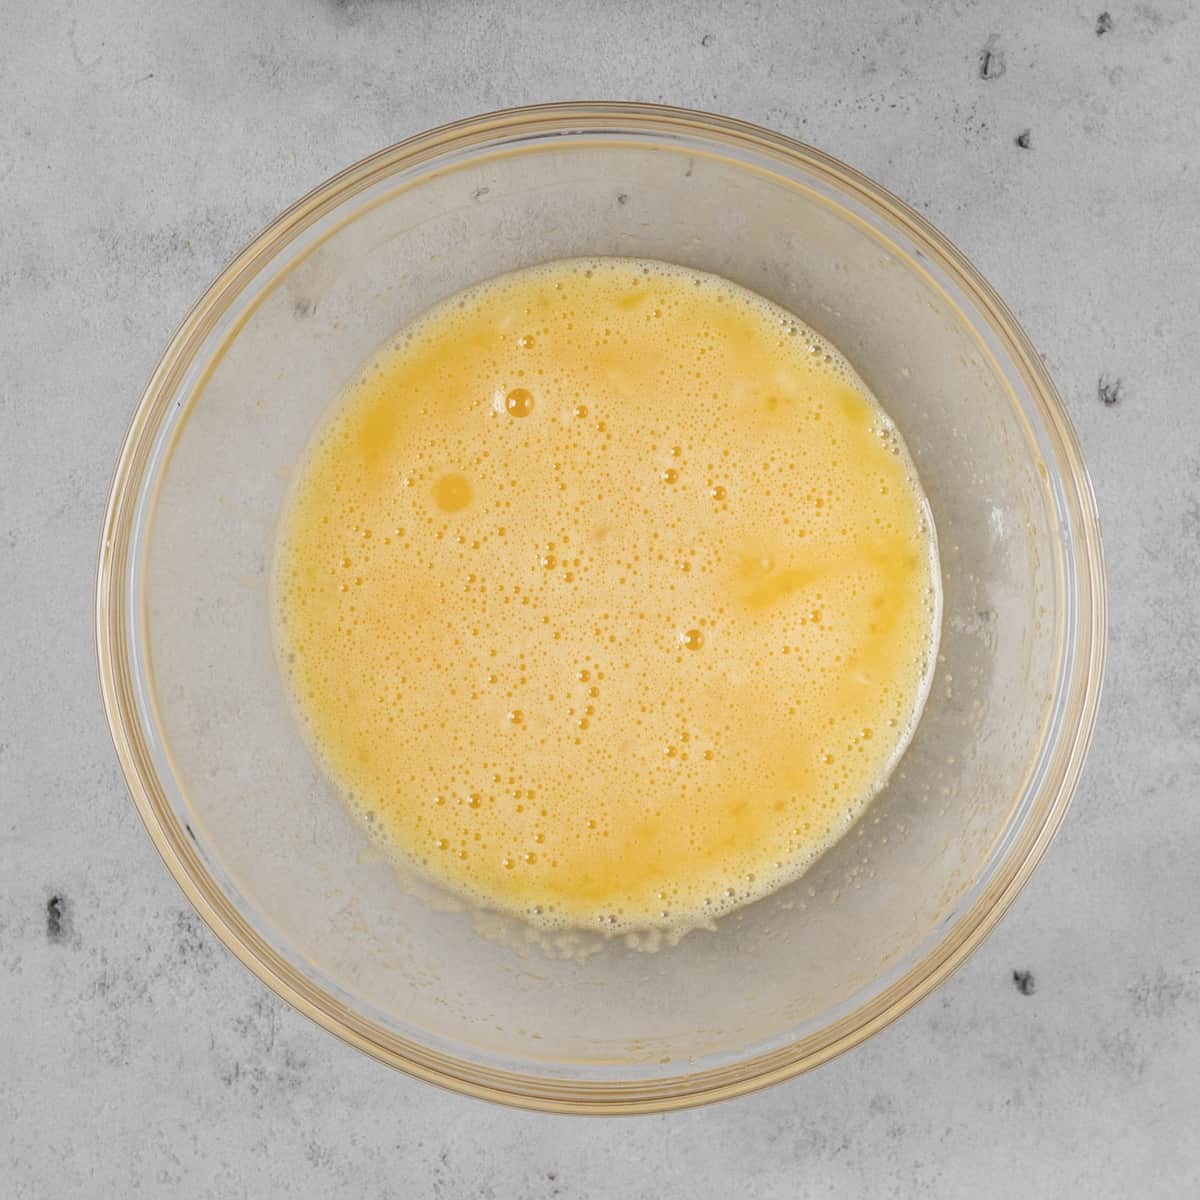 the eggs and sugar combined in a glass bowl on a grey background